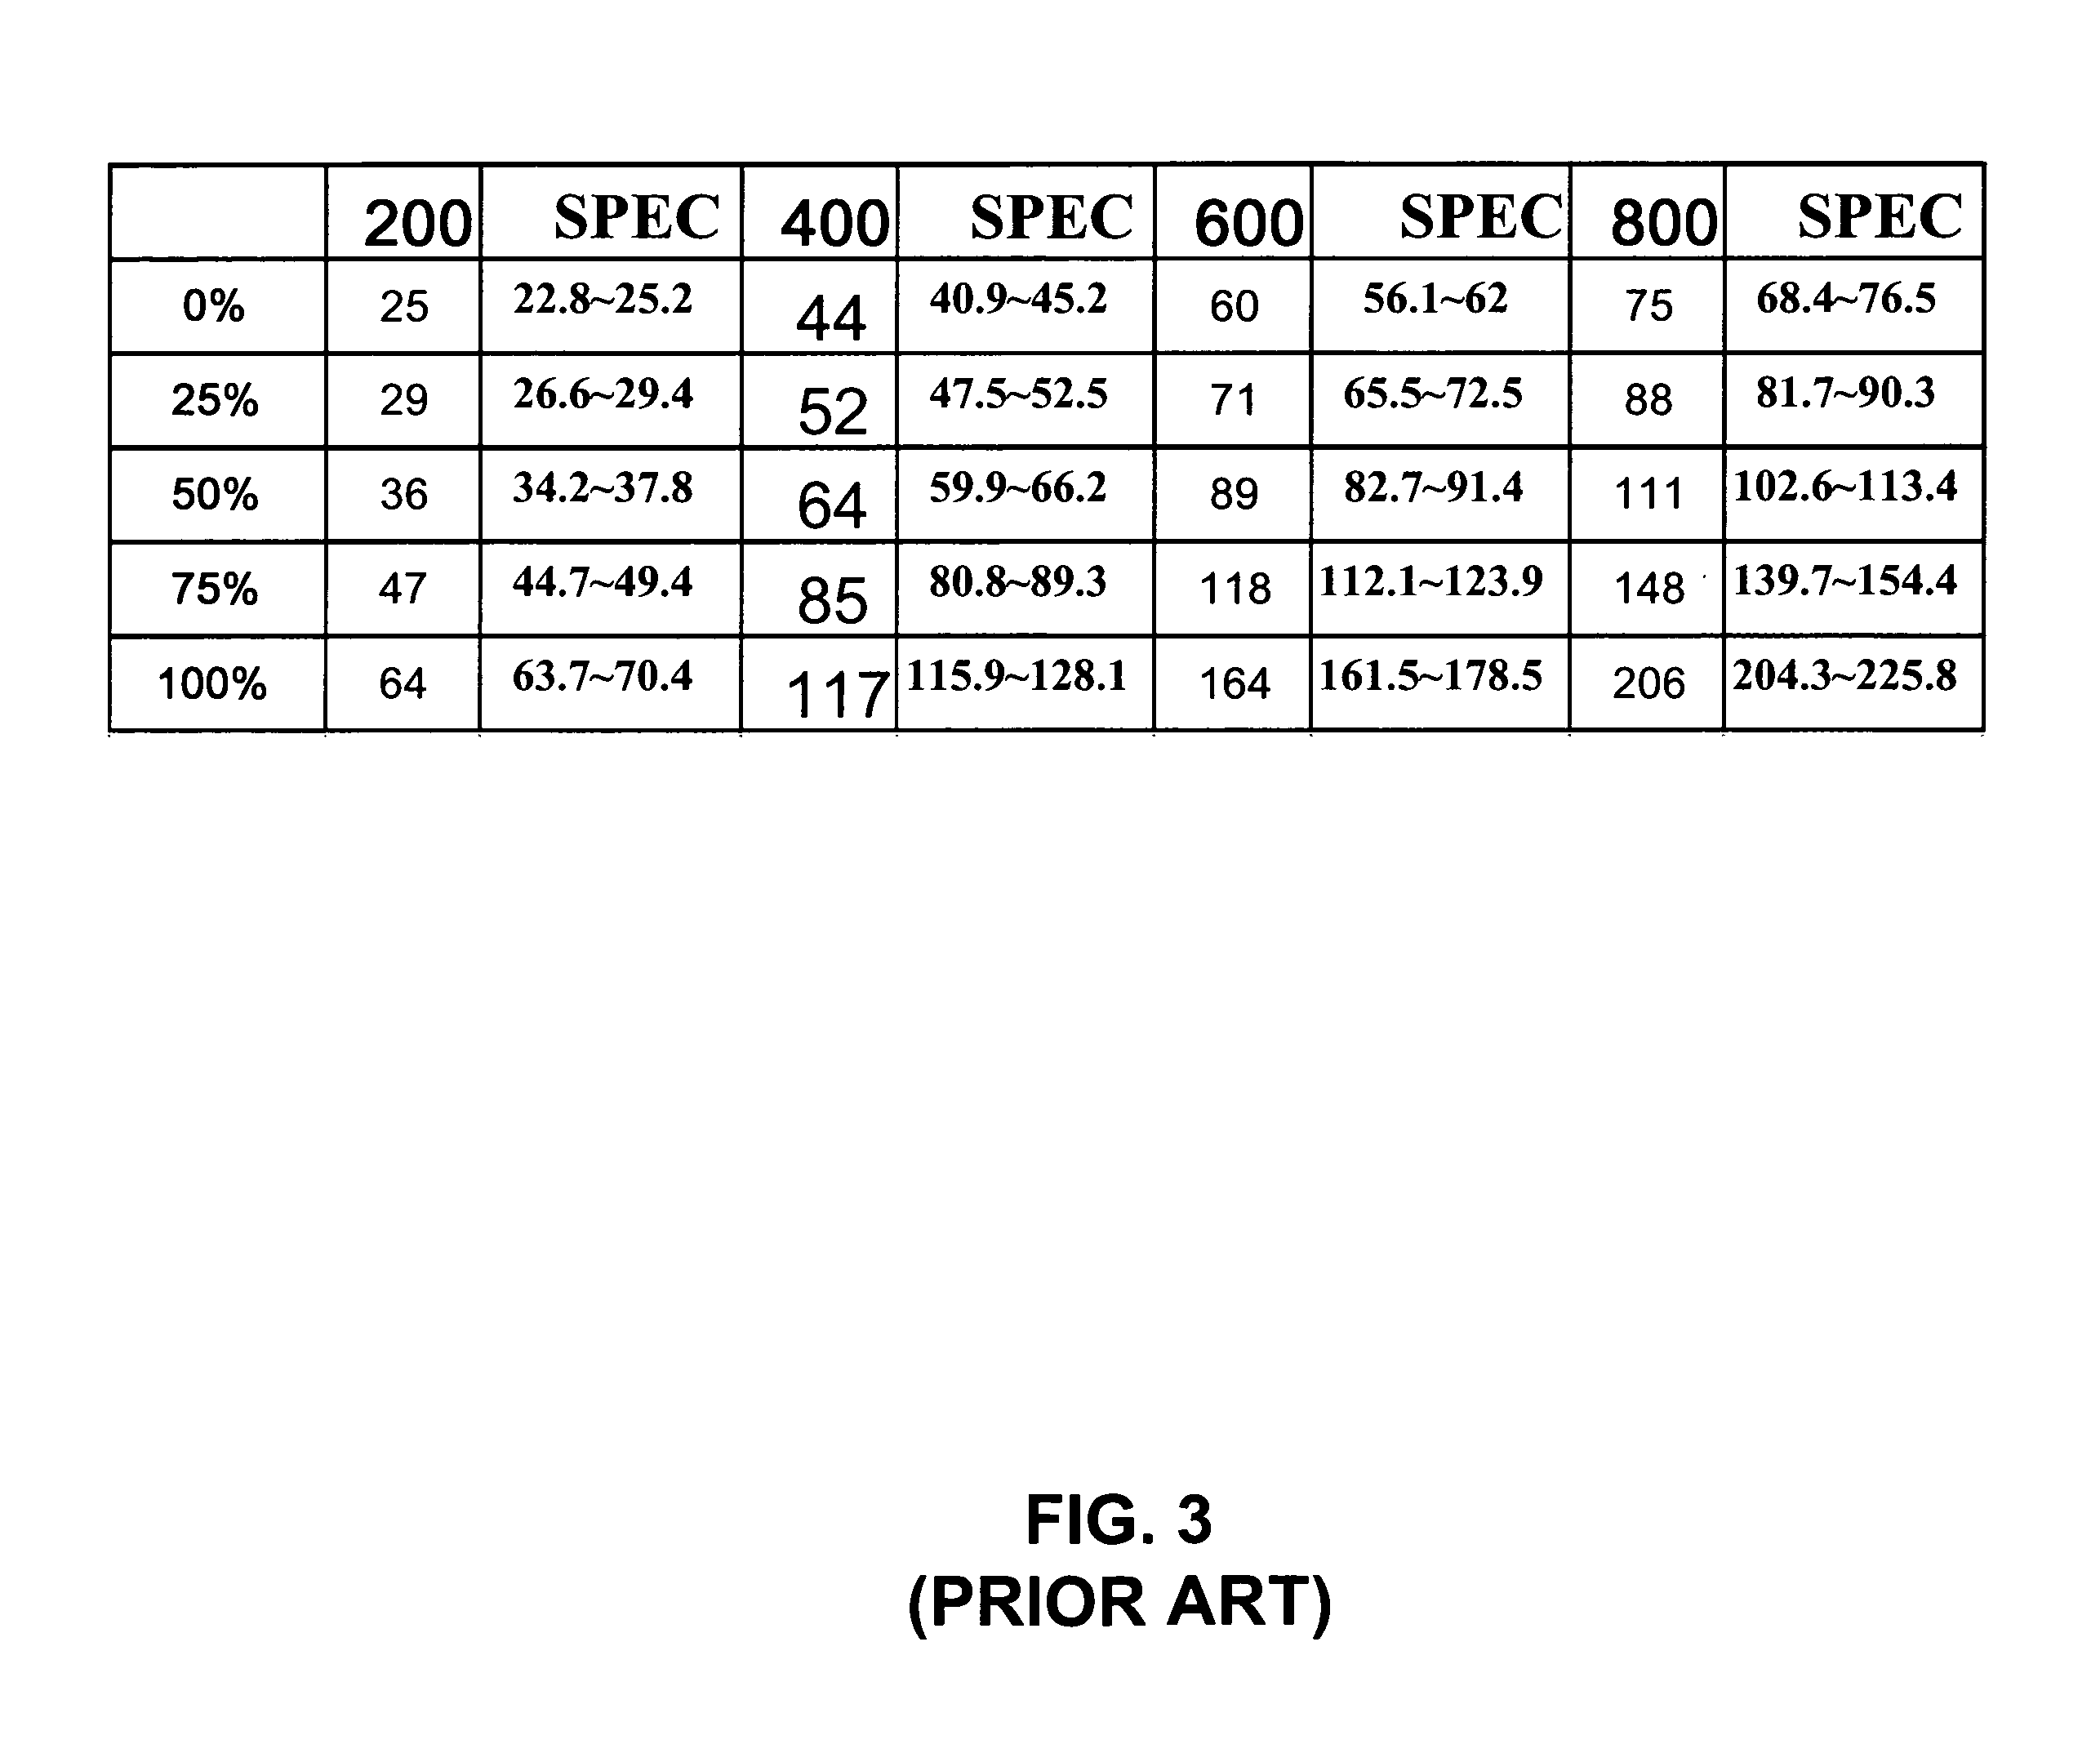 Method of performing a pressure calibration during waferless autoclean process